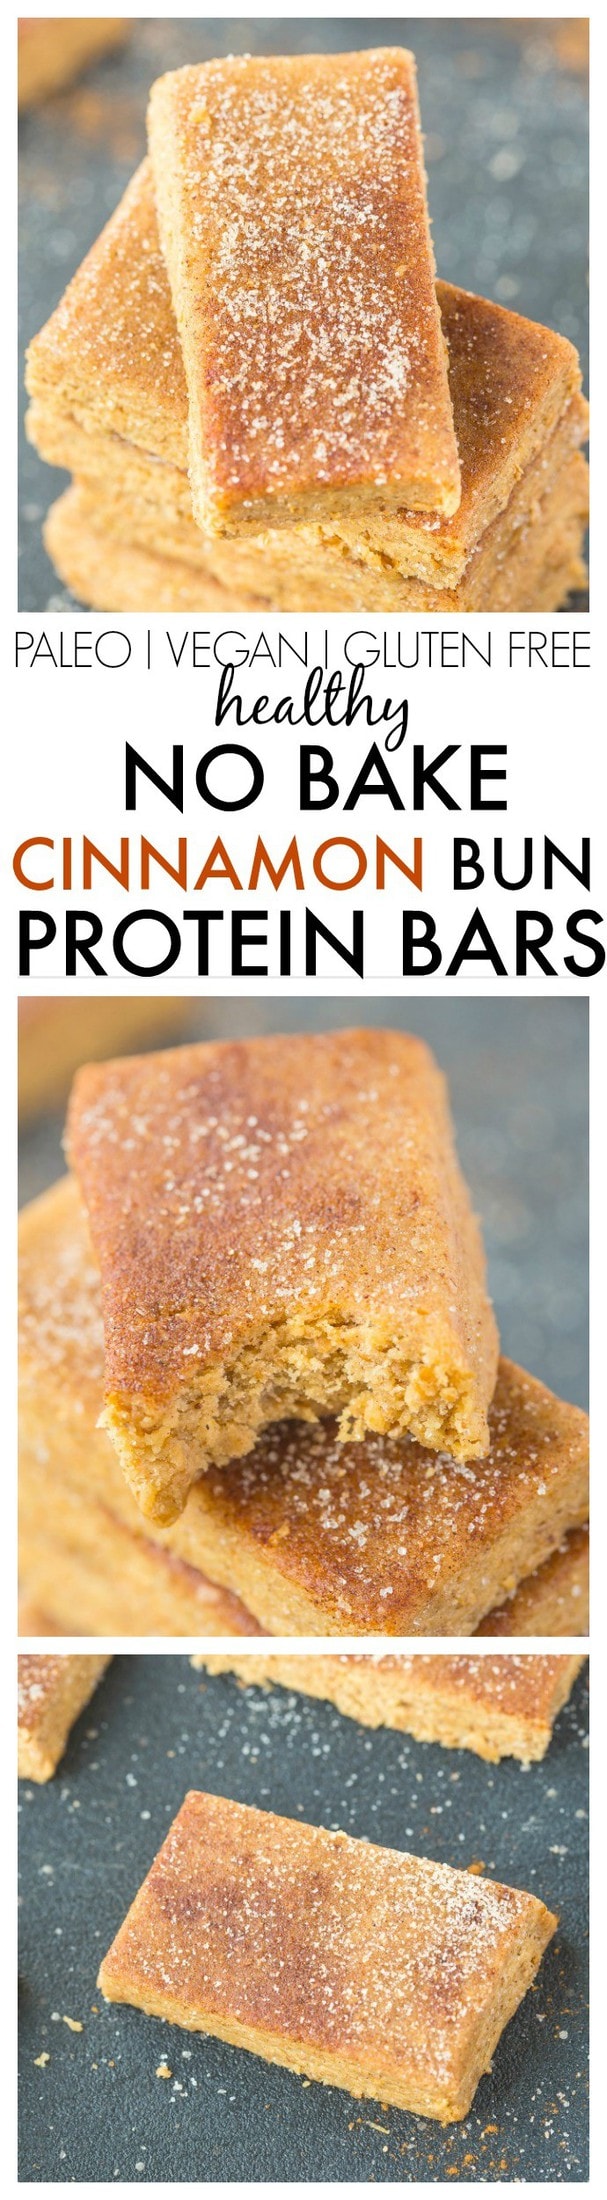 Healthy No Bake Cinnamon Bun Protein Bars-Just 10 minutes and 1 bowl to whip these up- Soft, chewy and no refrigeration needed- They taste like dessert! {vegan, gluten free, sugar free + paleo option!}- thebigmansworld.com